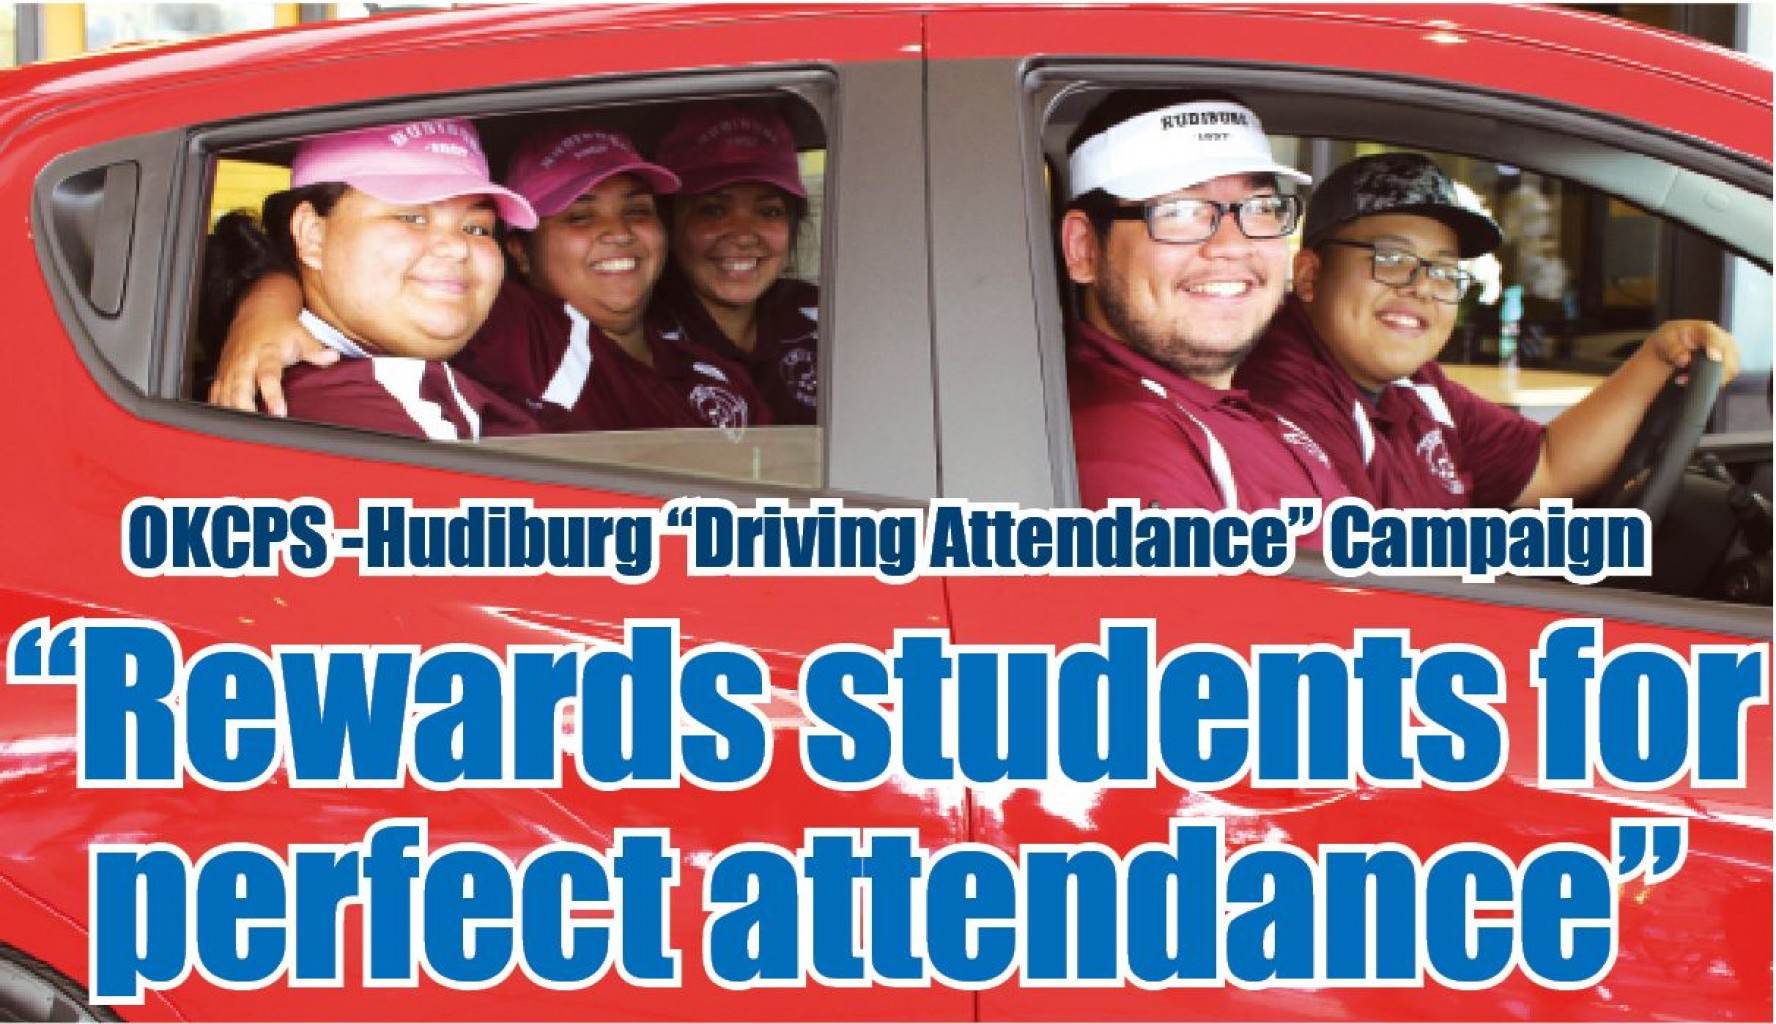 OKCPS -Hudiburg “Driving Attendance” Campaign  “Rewards students for perfect attendance” 